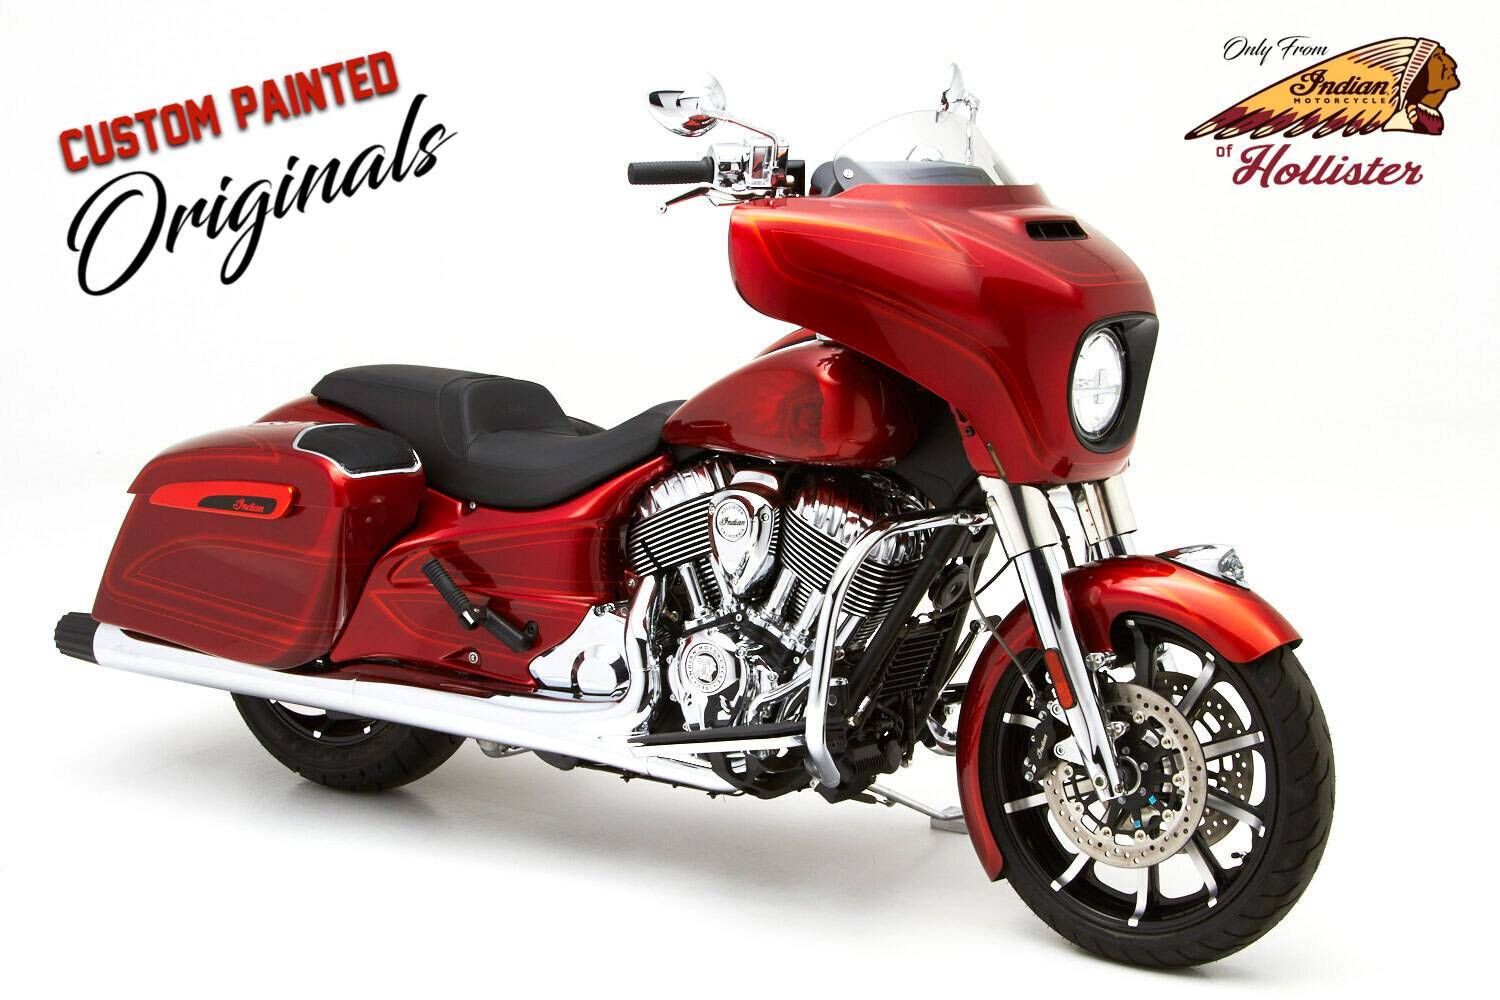 2022 Indian Chieftain® Limited in Hollister, California - Photo 5